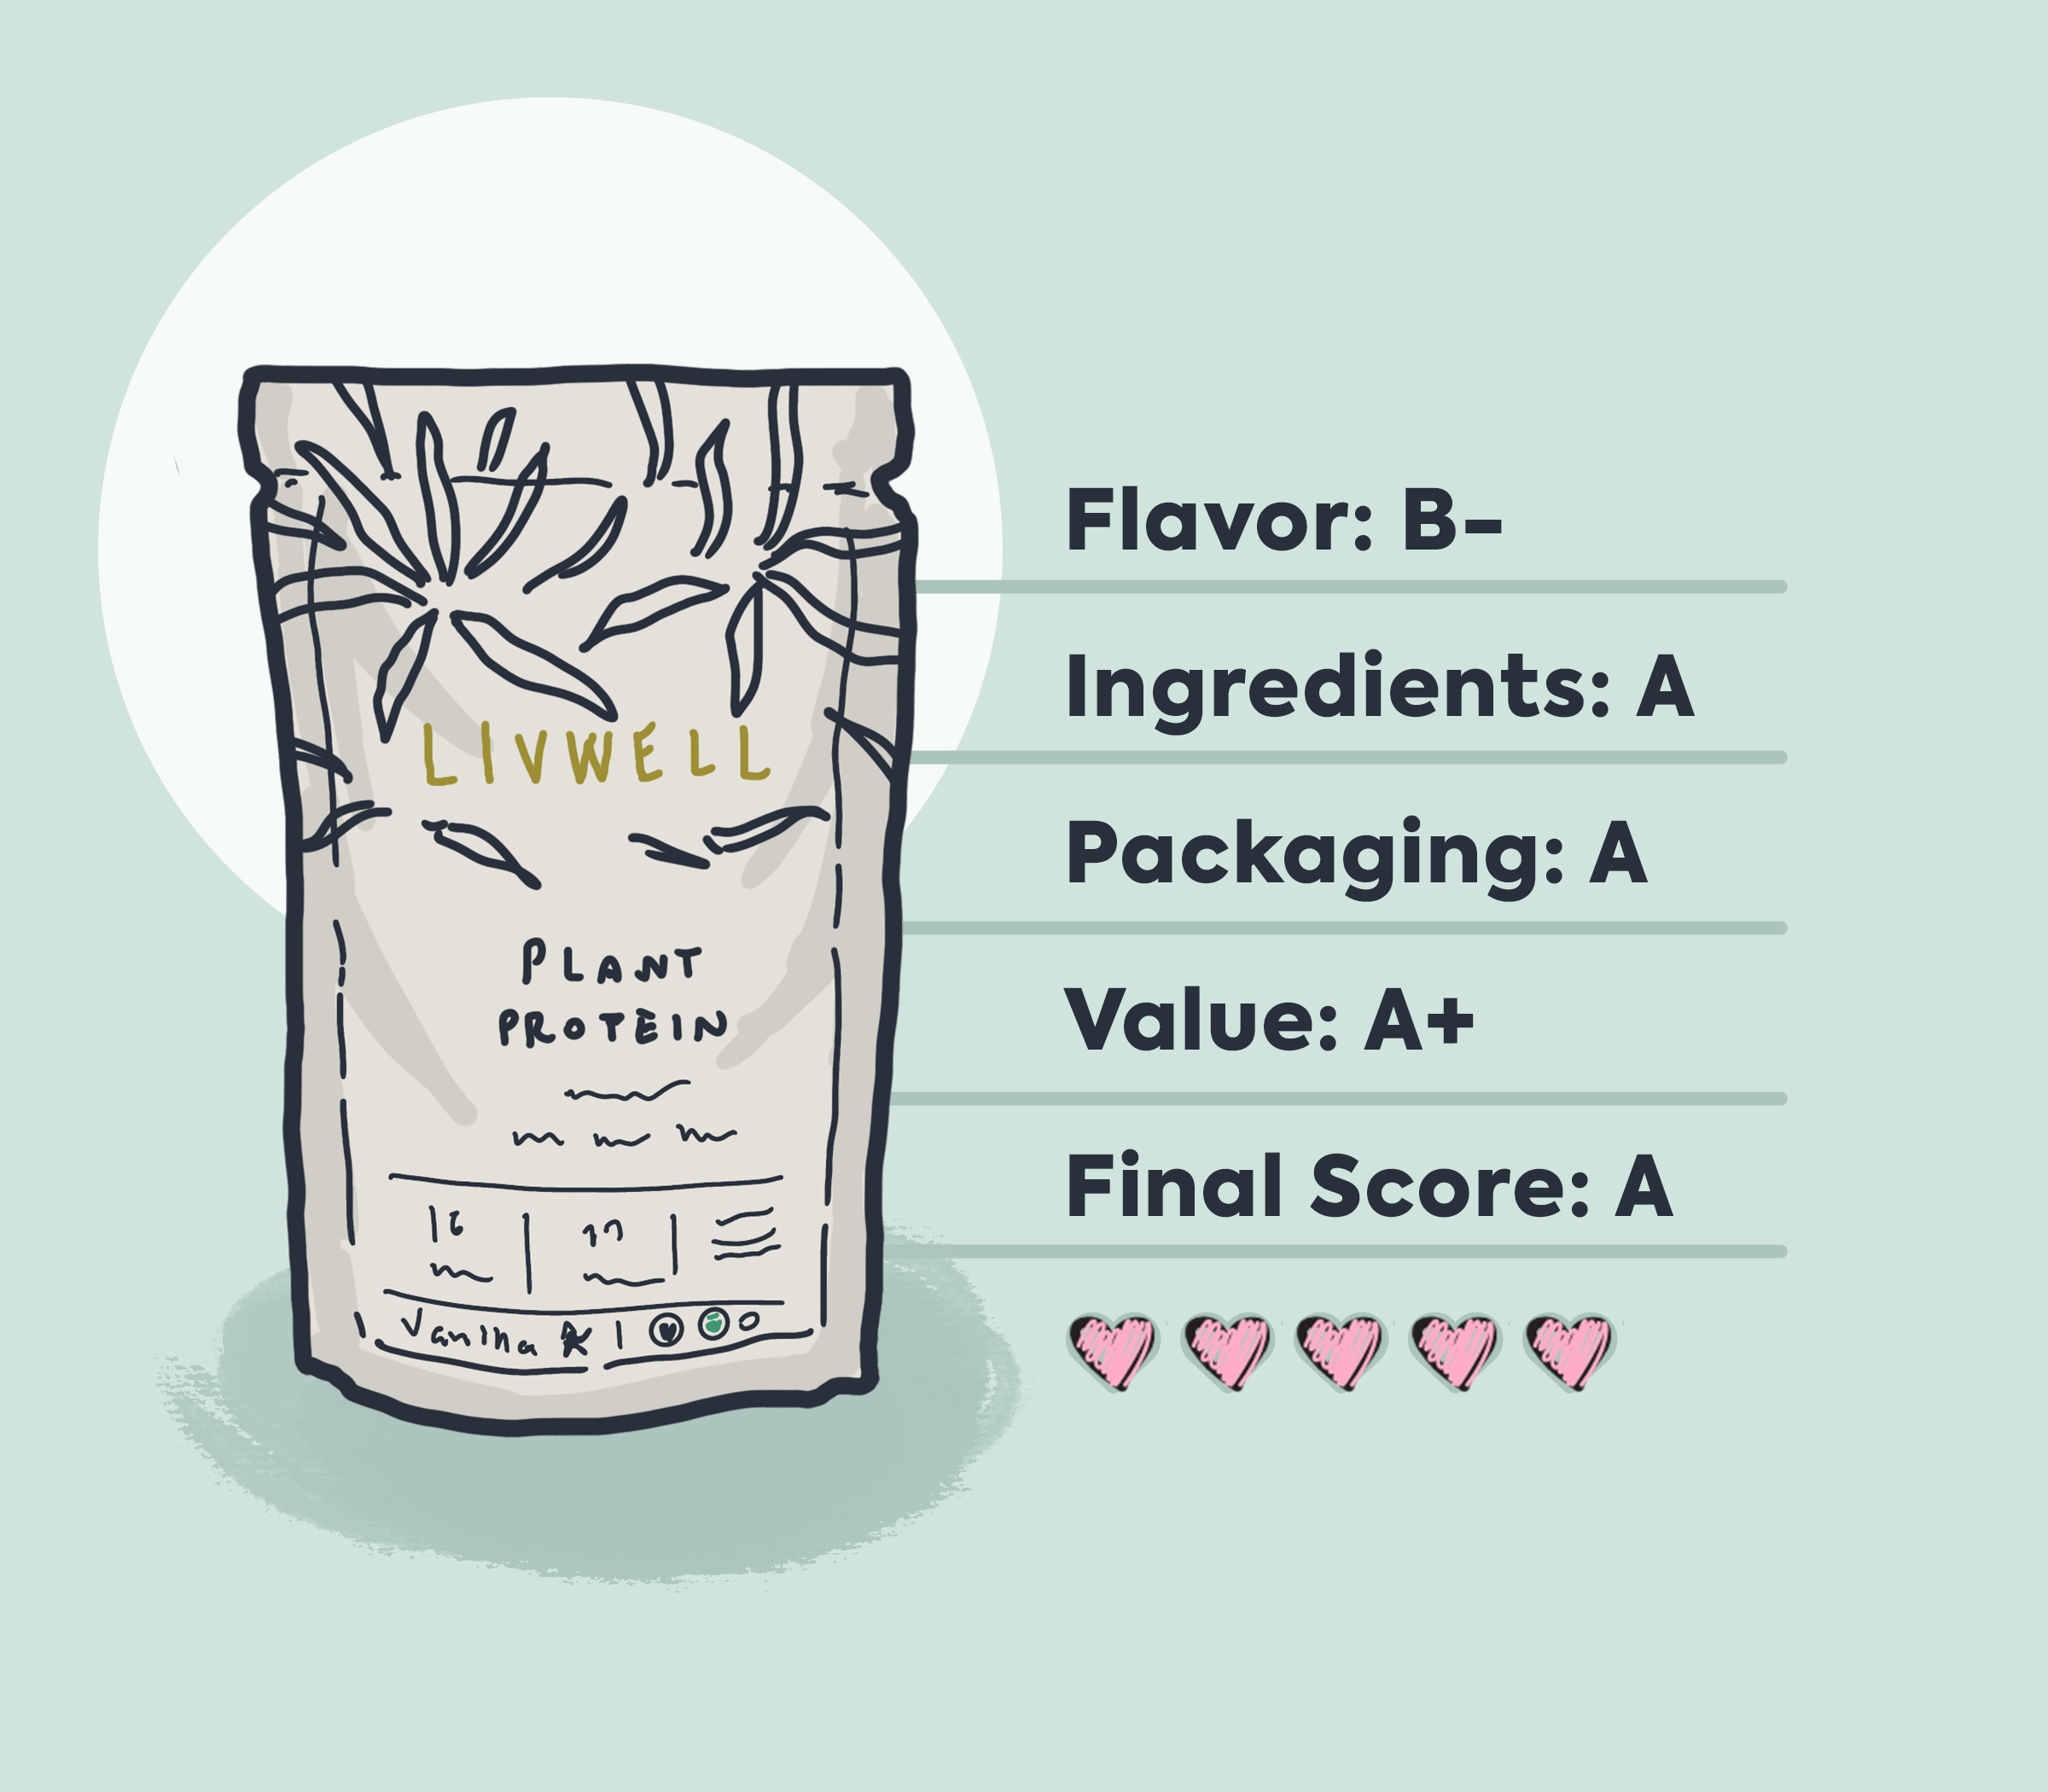 livwell protein packaging illustration over green background with review grade information sorted by product aspect including flavor, ingredients, packaging, value, and final score.